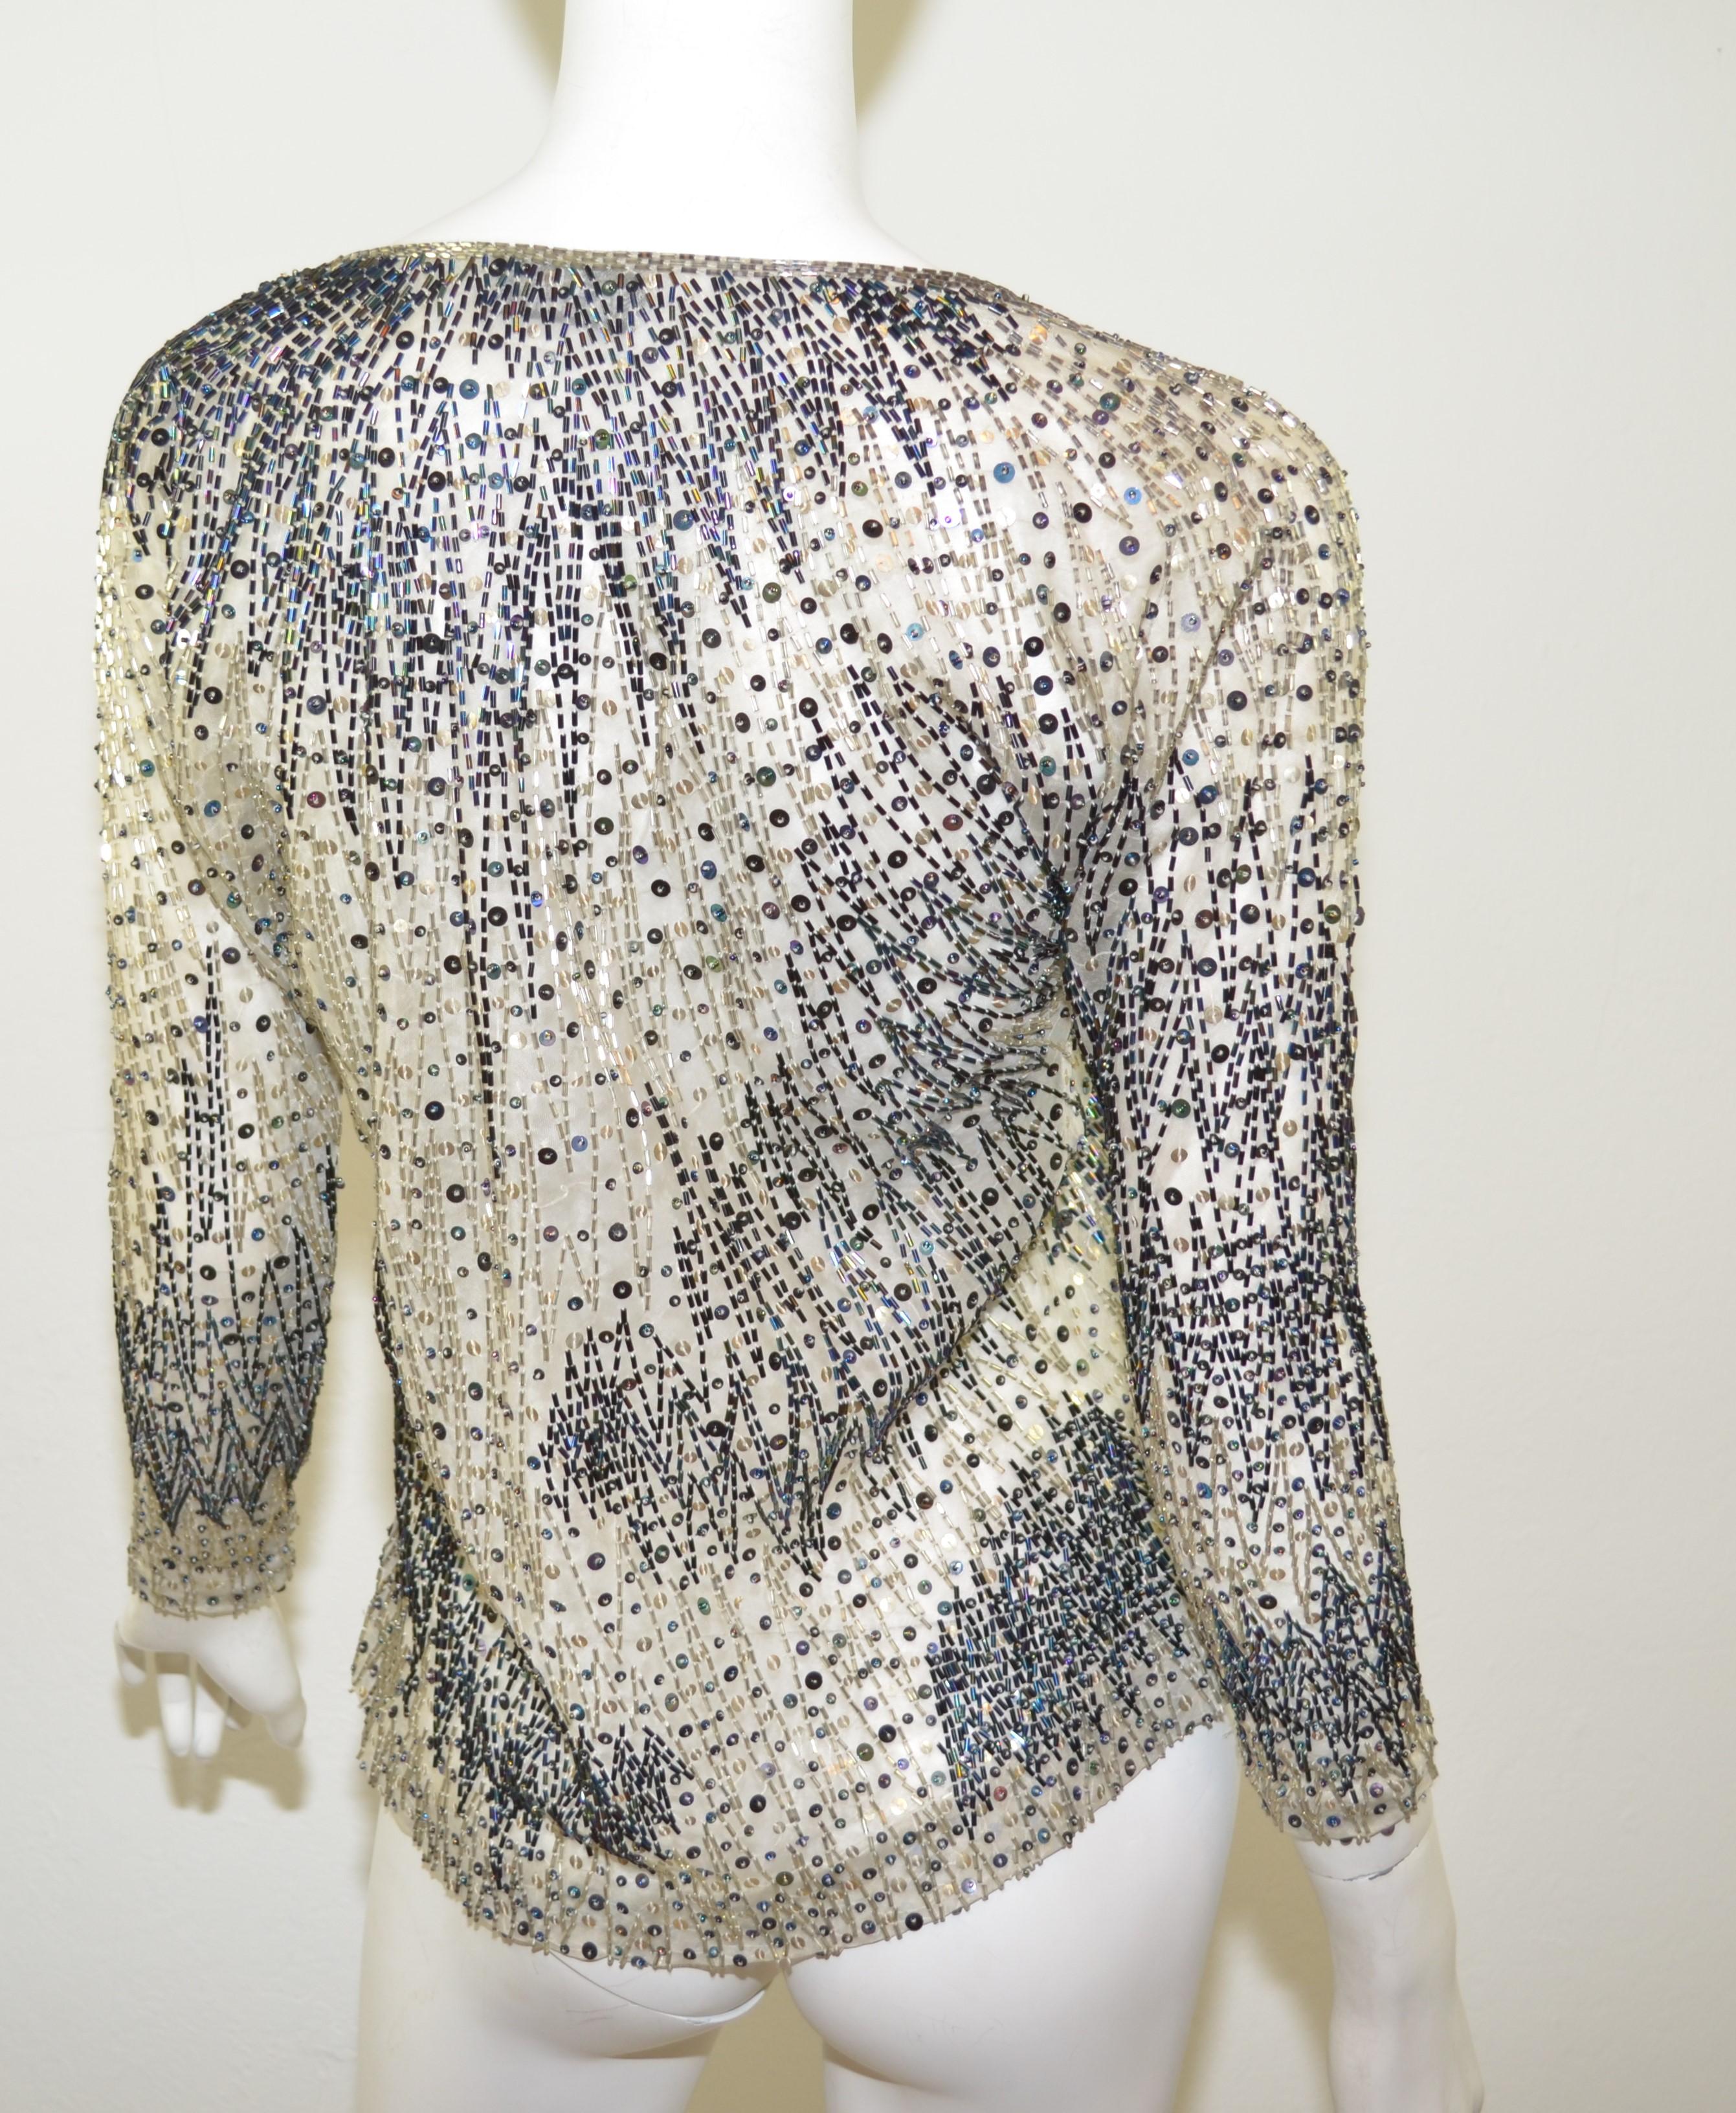 Halston blouse features a full bead and sequin detailing throughout a mesh silk fabric with snap buttons at the cuffs. Blouse is in excellent pre-owned condition with no major flaws to mention.

Bust 34''
Sleeves 21''
Length 24''